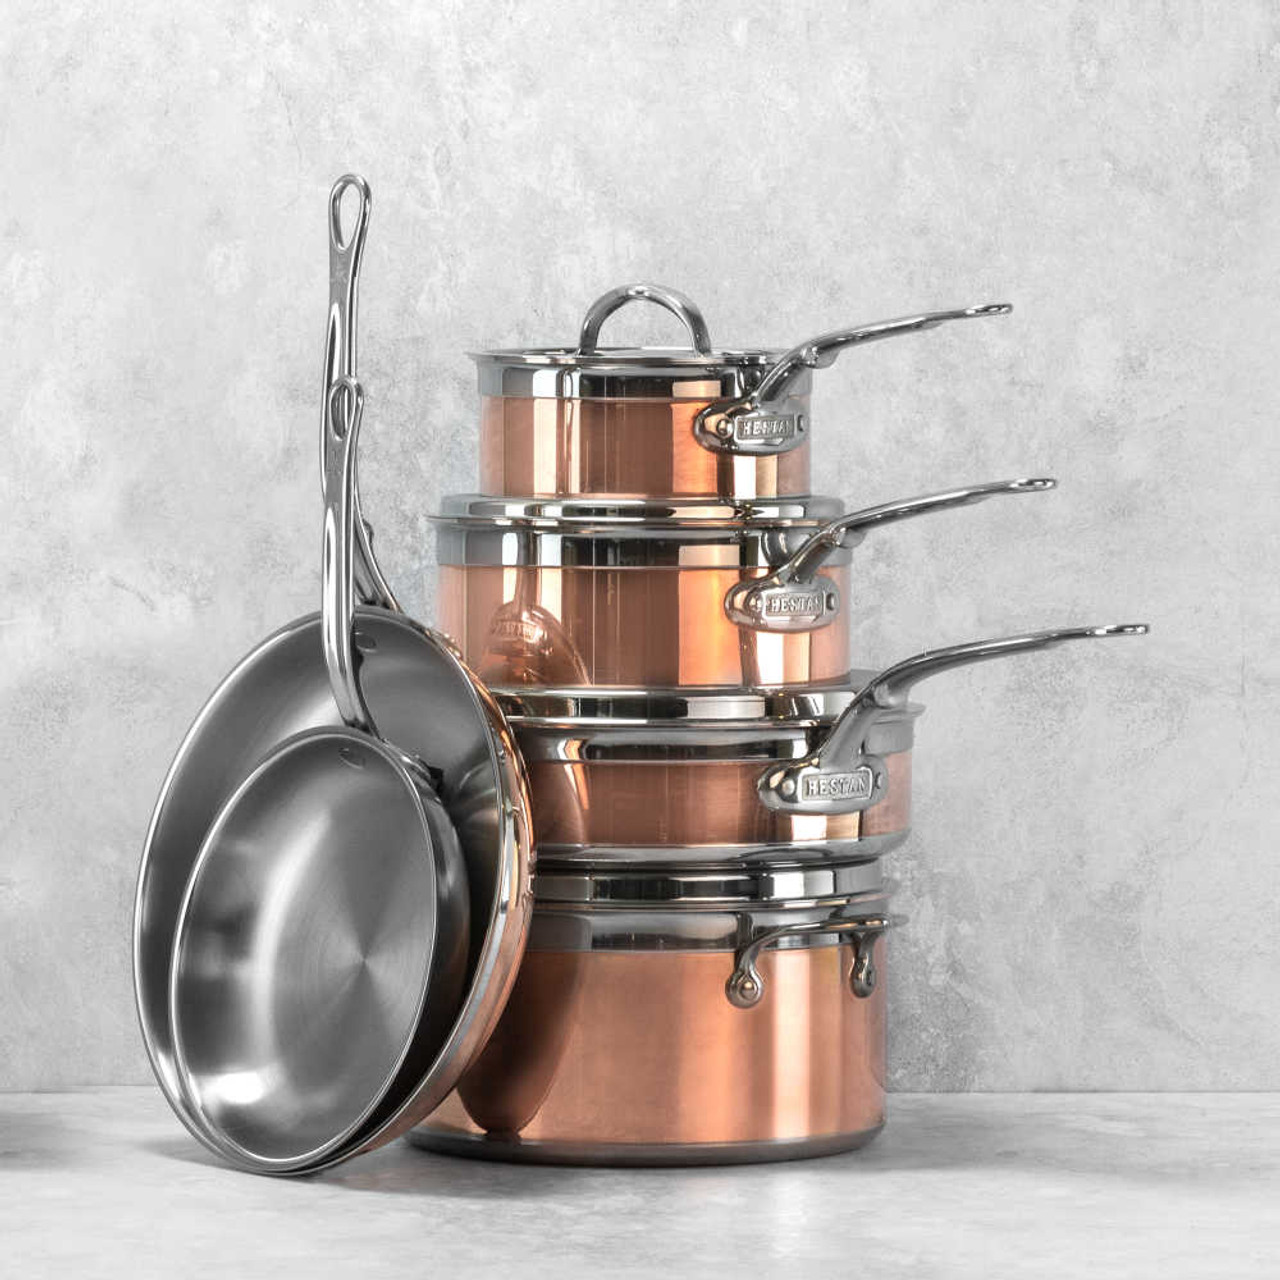 https://cdn11.bigcommerce.com/s-hccytny0od/images/stencil/1280x1280/products/3790/16540/Hestan_CopperBond_10-Piece_Cookware_Set_2__78090.1632179322.jpg?c=2?imbypass=on